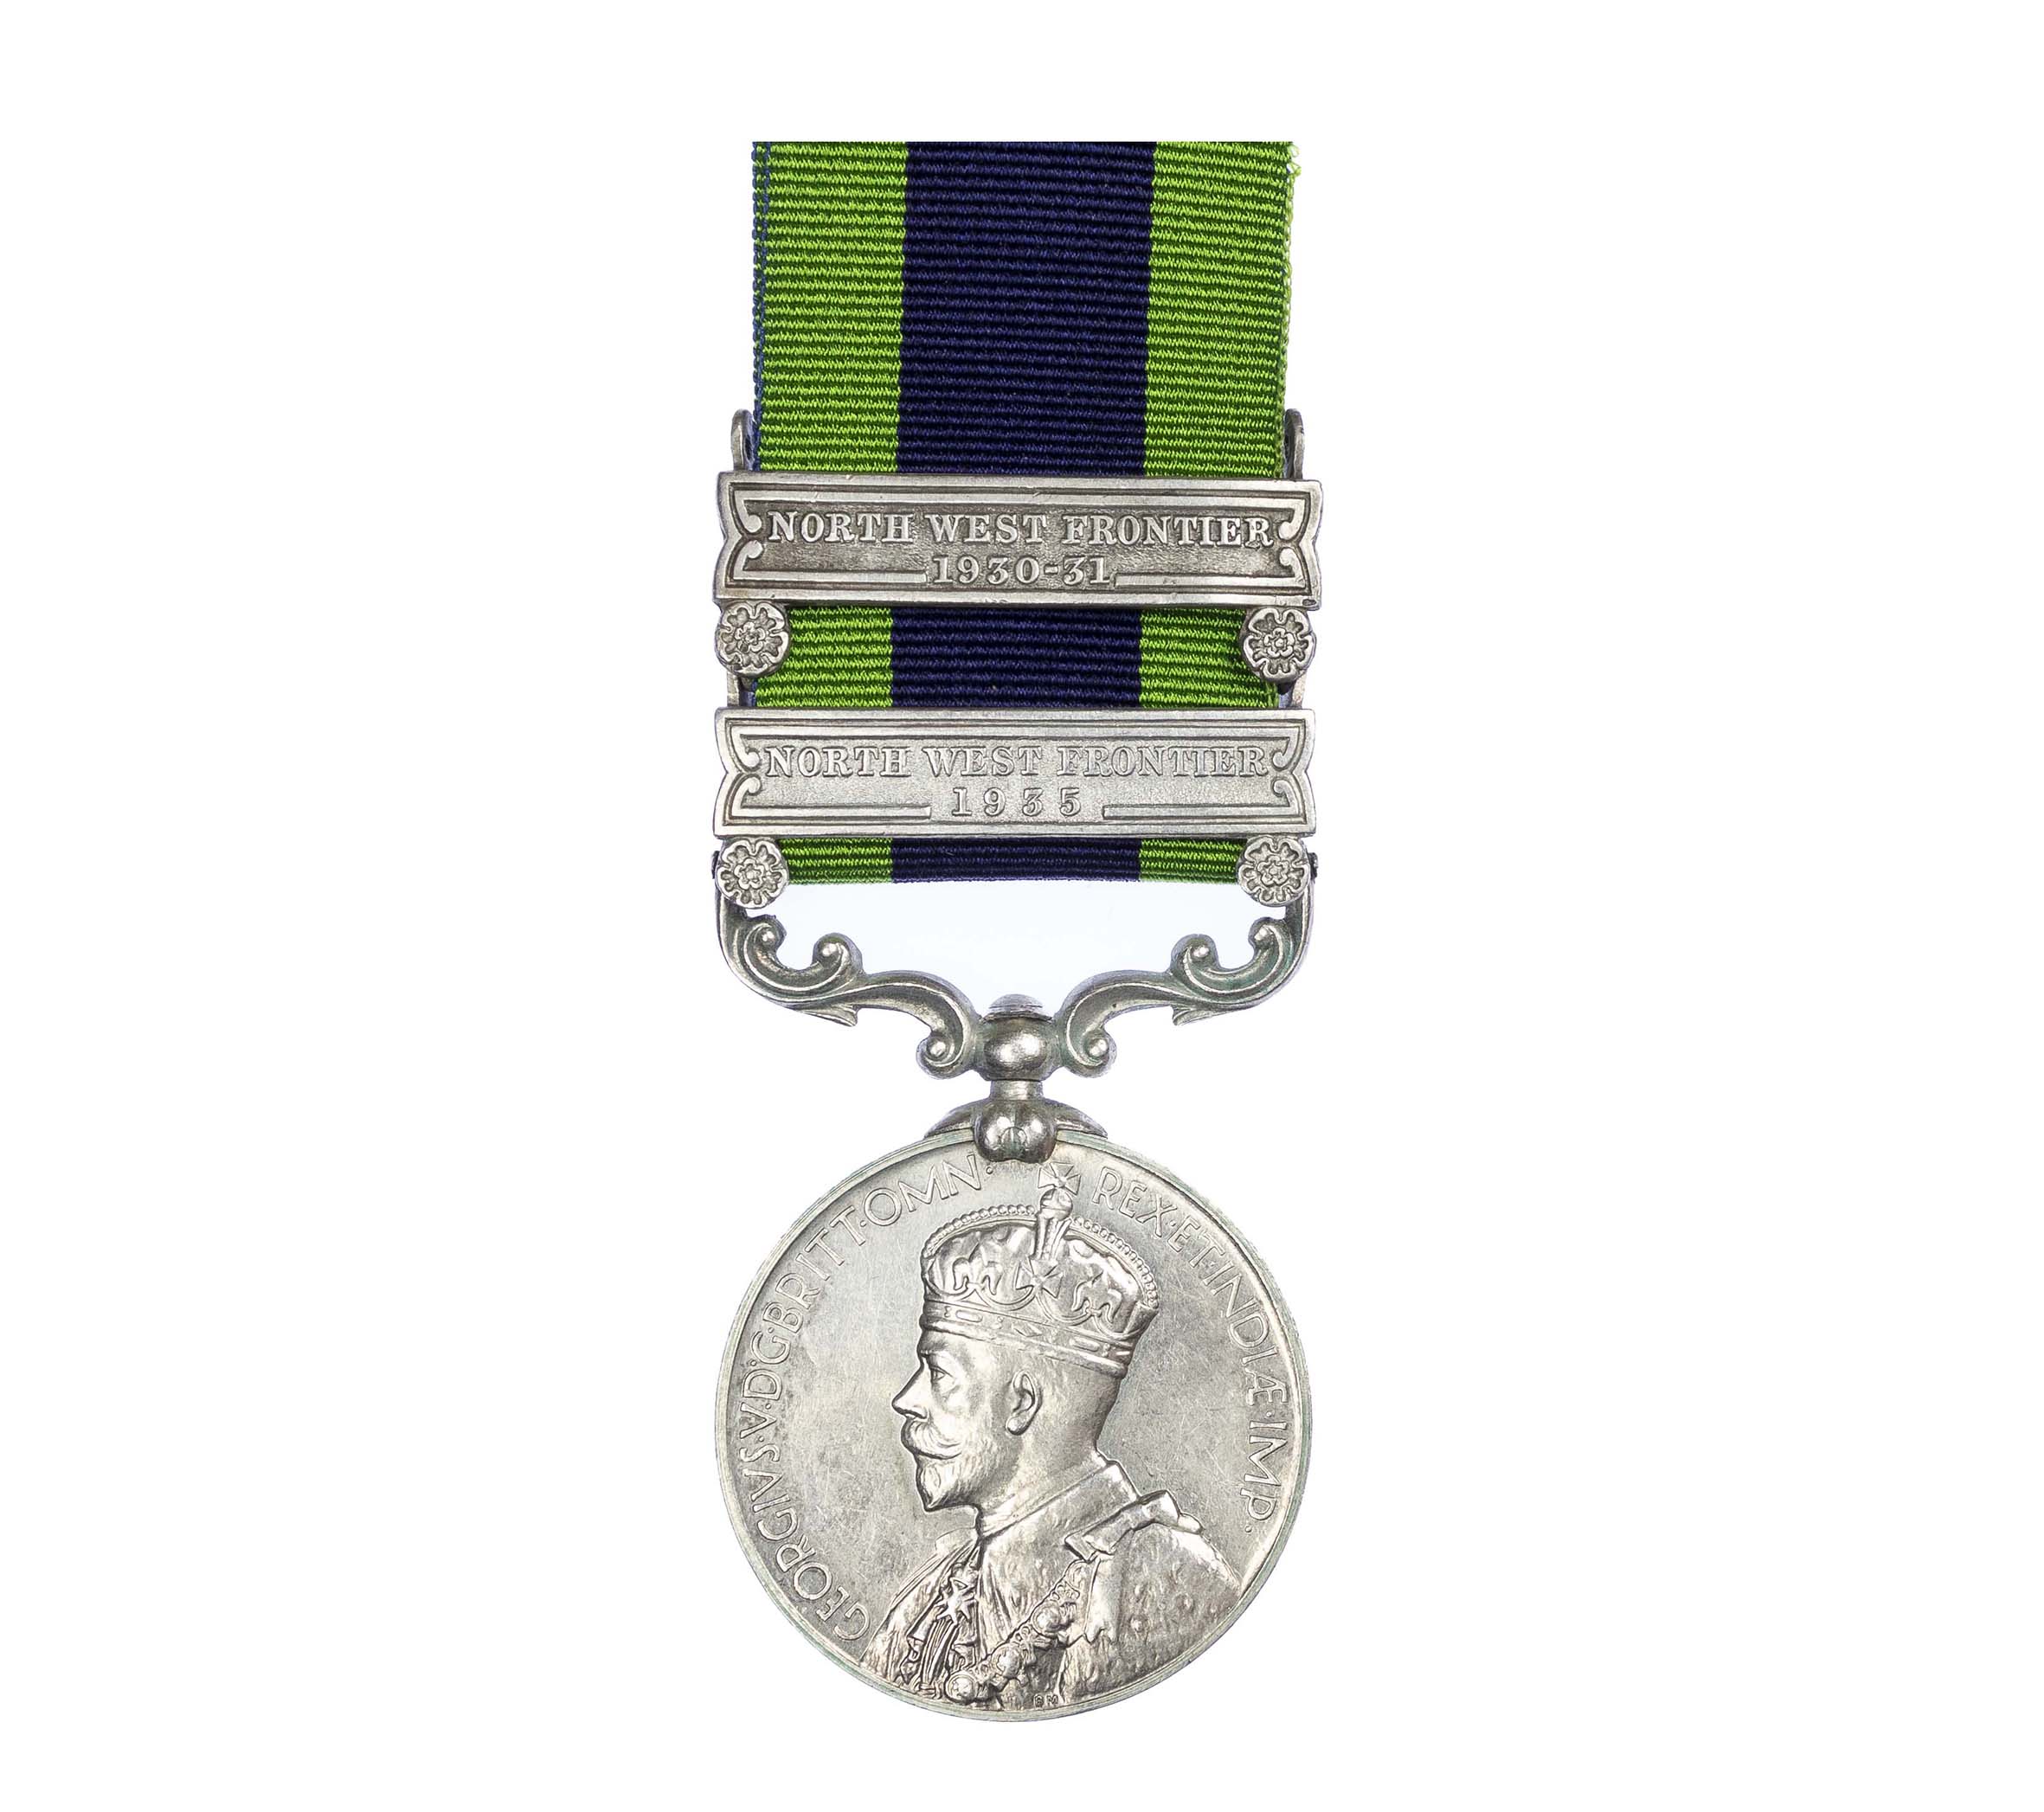 India General Service Medal 1908-1935, GVR, two clasps North West Frontier 1930-31, North West Frontier 1935 to Sapper Ganga Singh